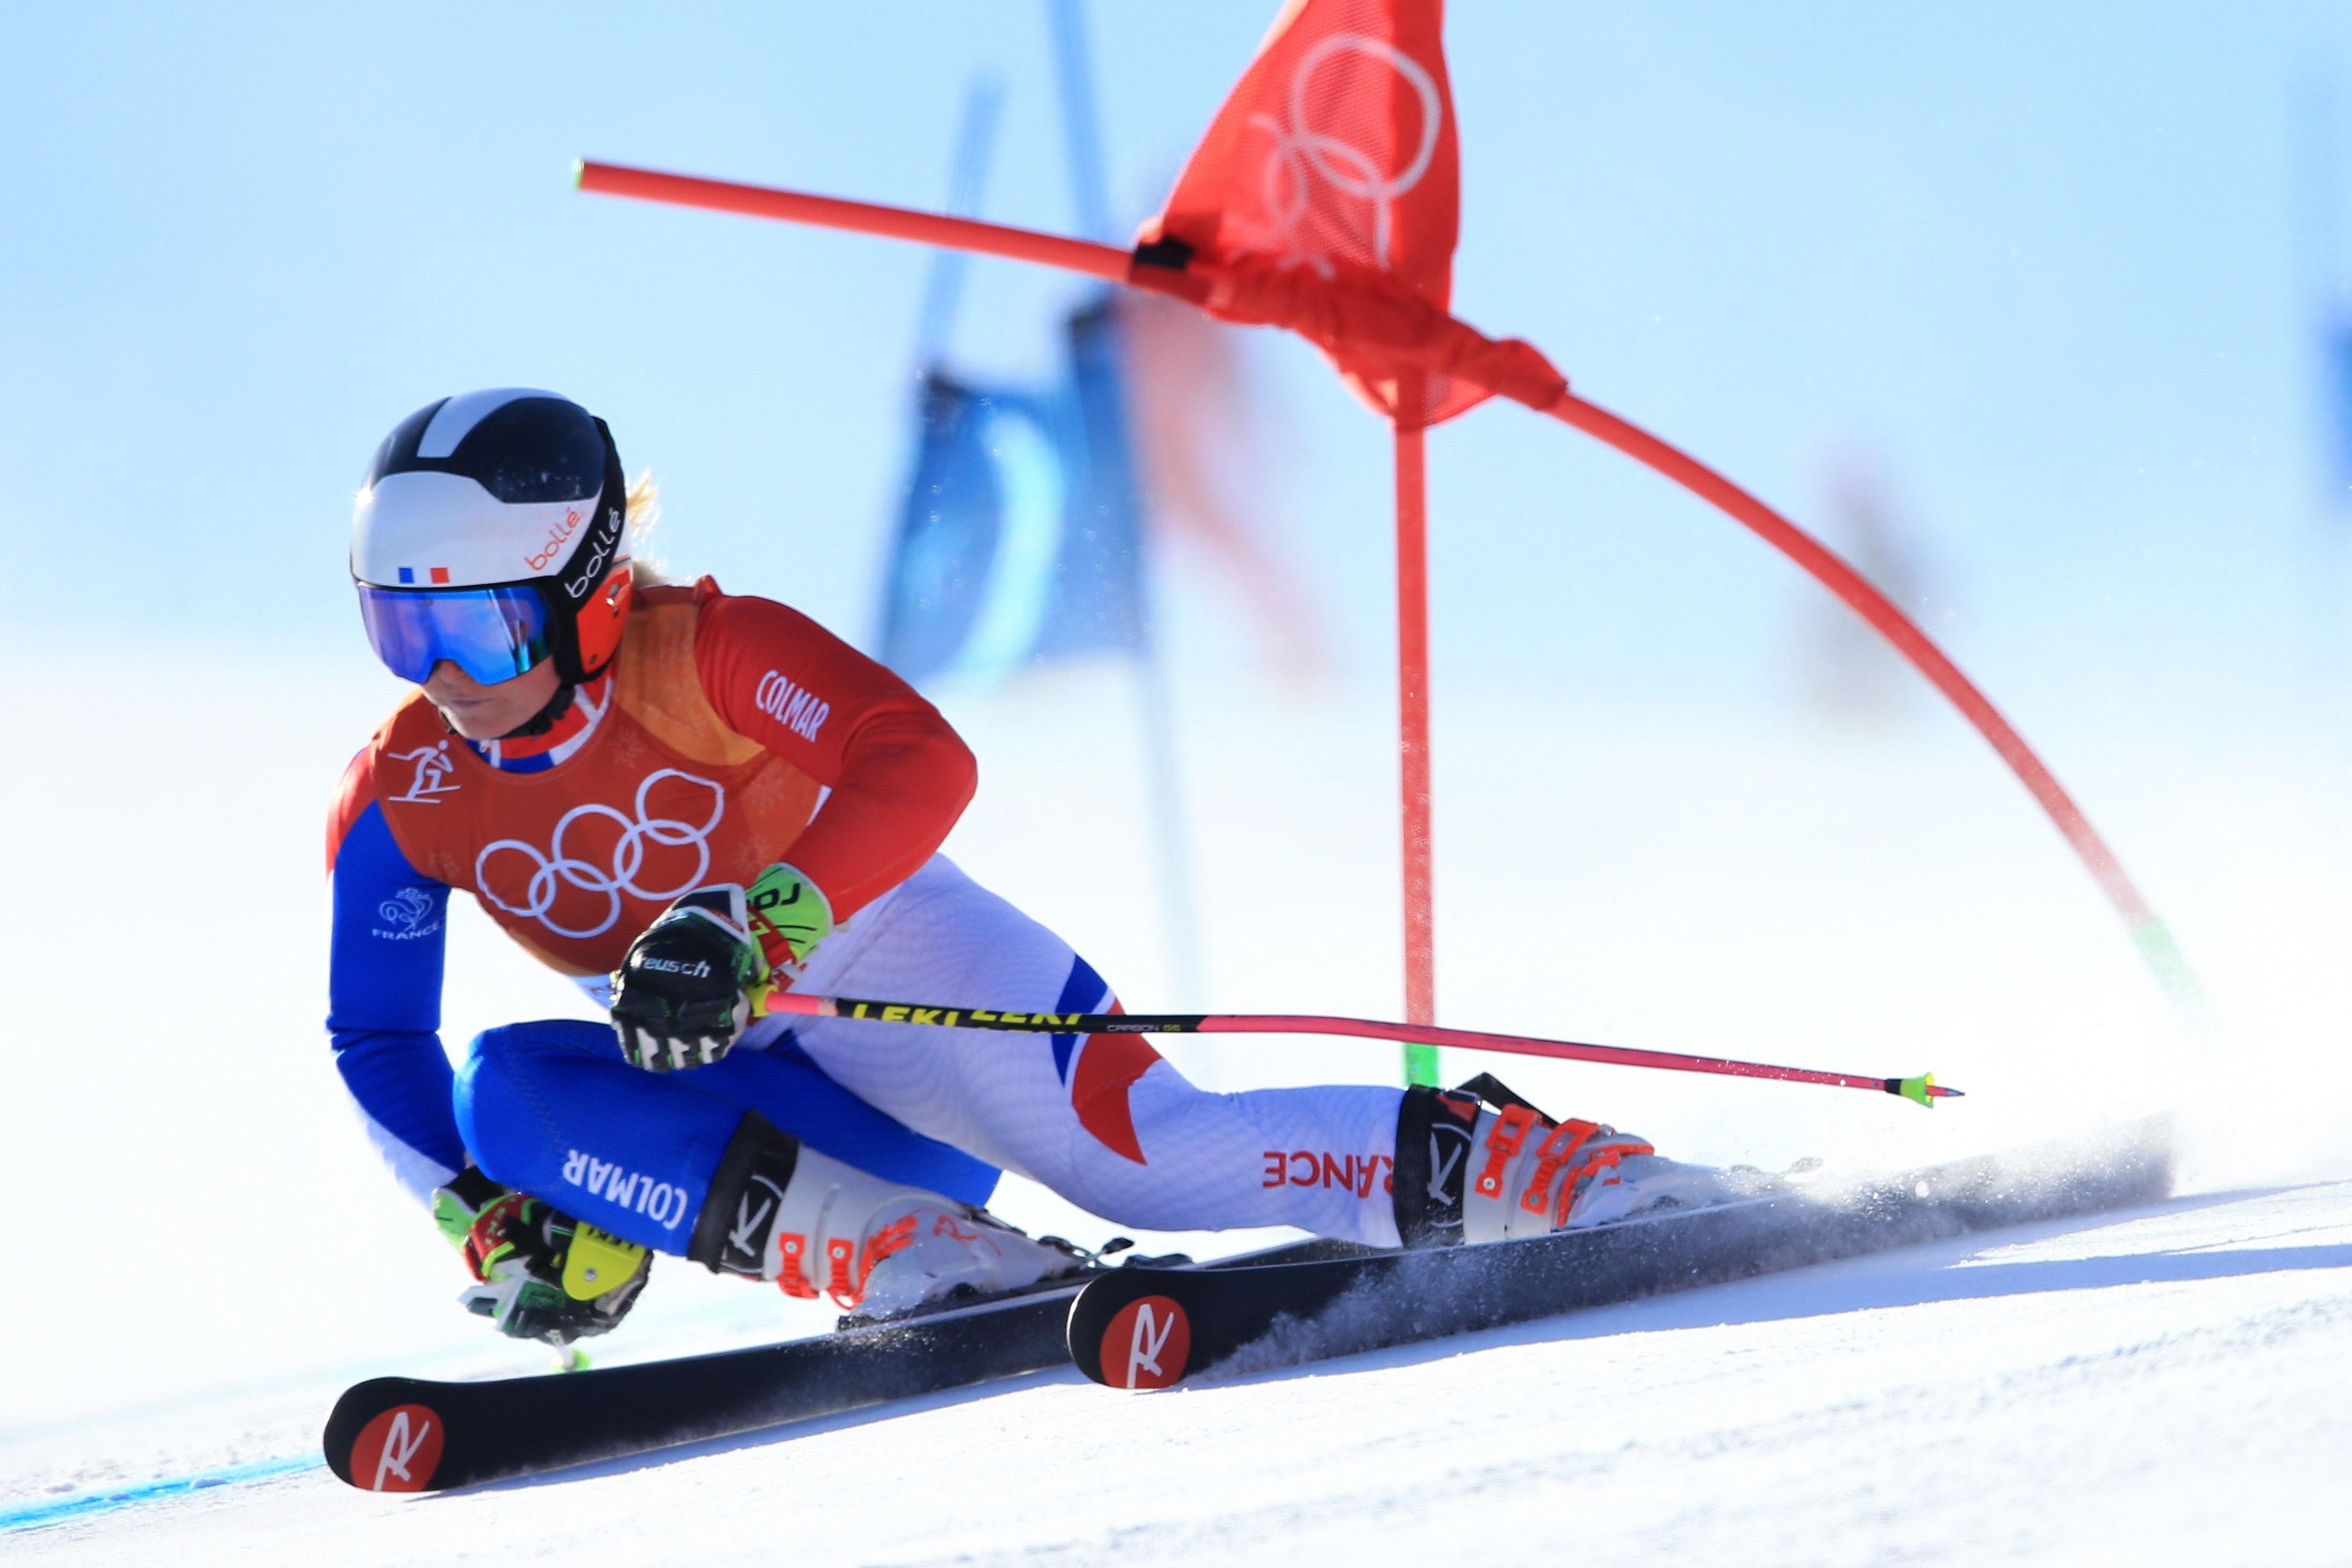 Why Do Slalom Skiers Hit The Gates? It Gives Them A Certain Advantage